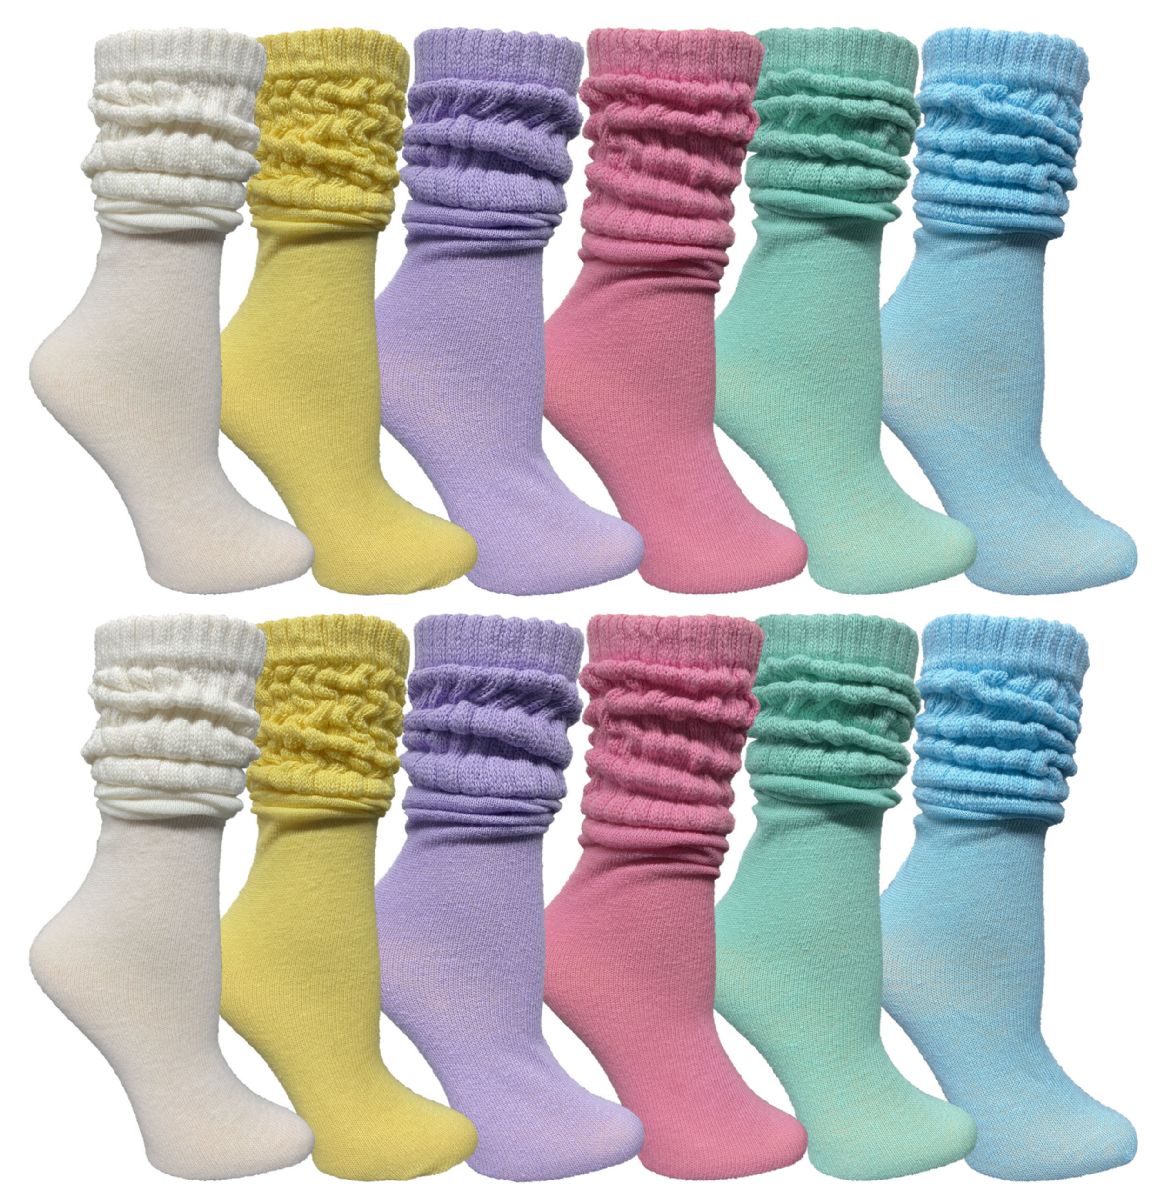 36 Pairs Yacht & Smith Slouch Socks For Women, Assorted Pastel Size 9-11 - Womens Crew Sock - Womens Crew Sock